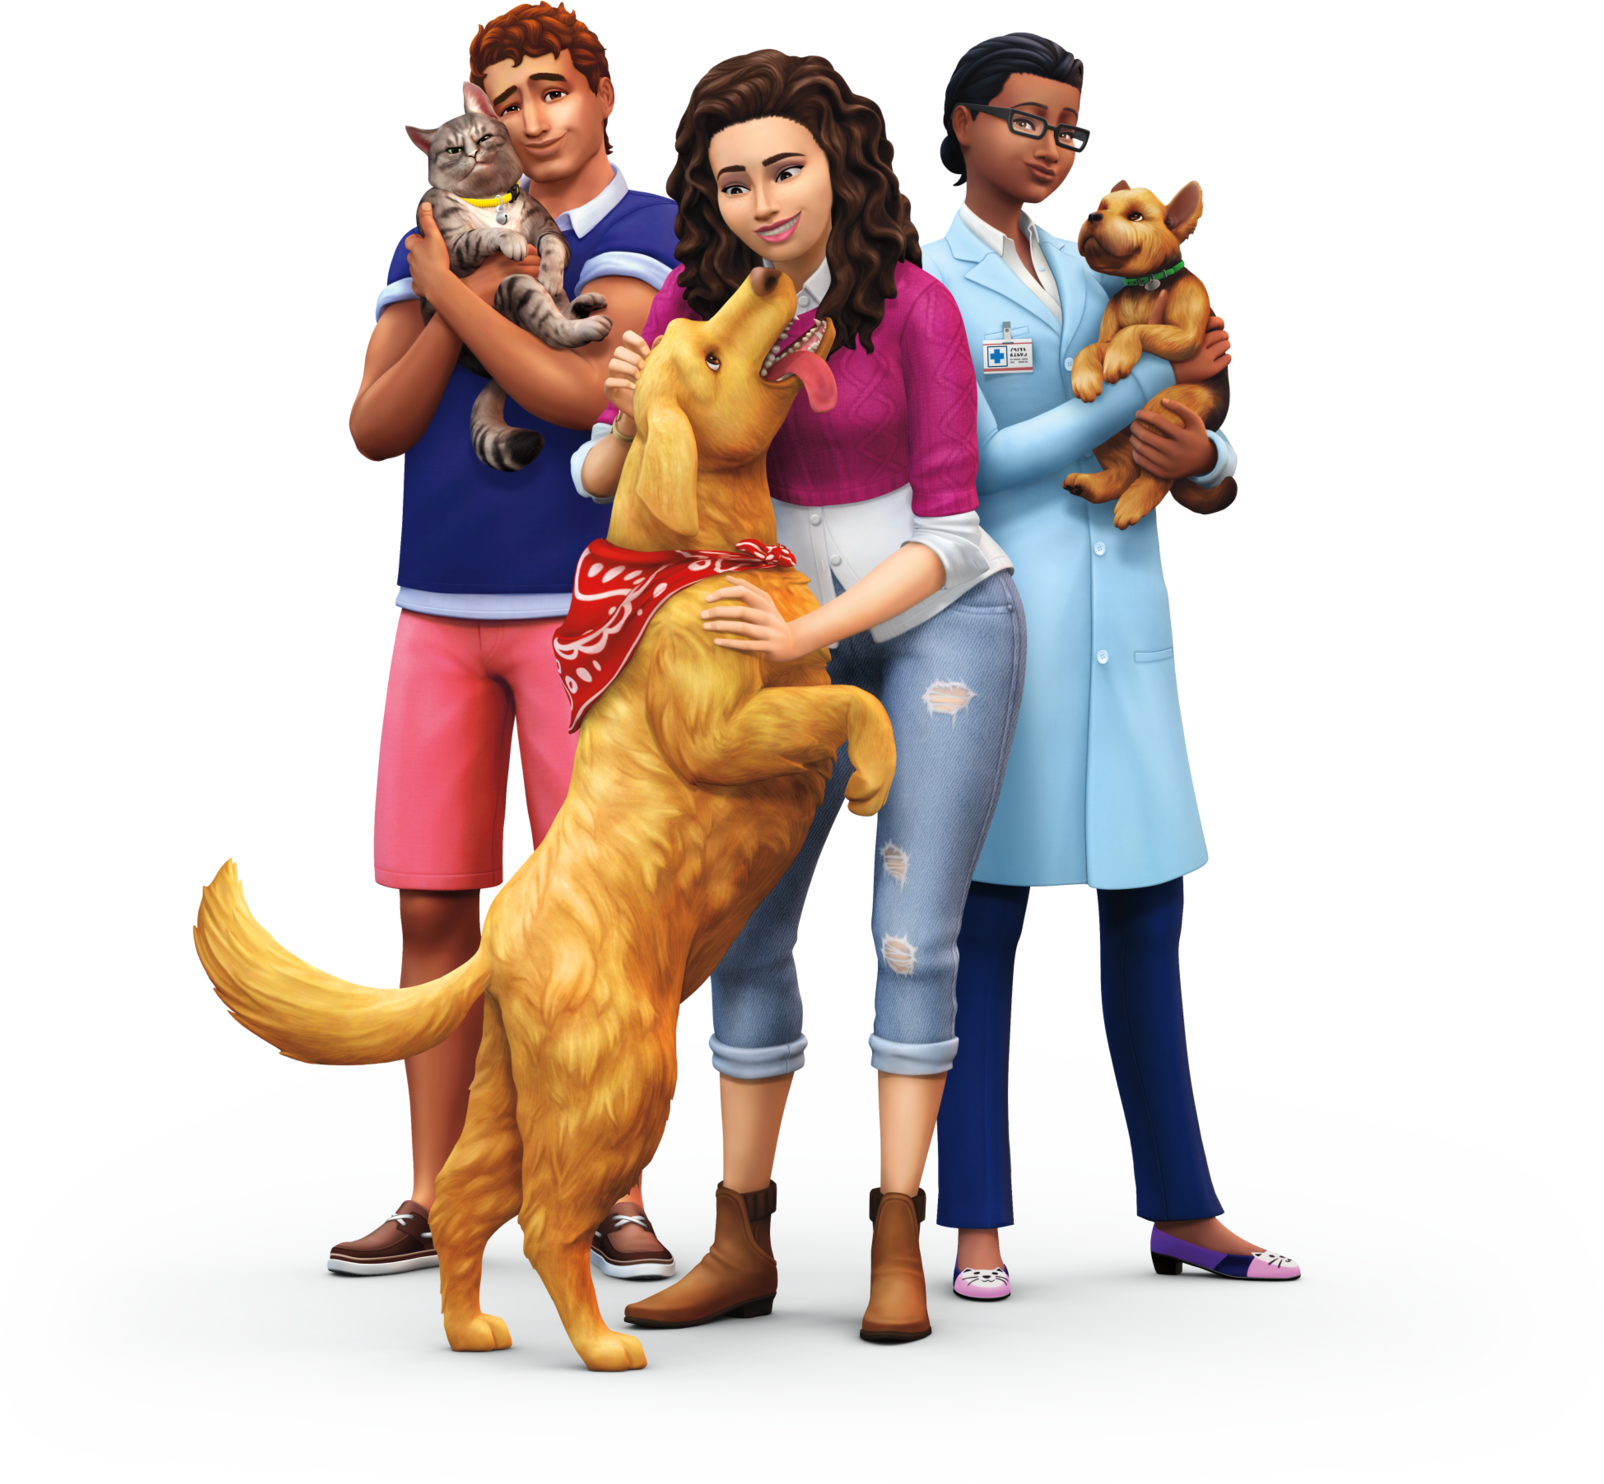 the sims 4 cats and dogs code free